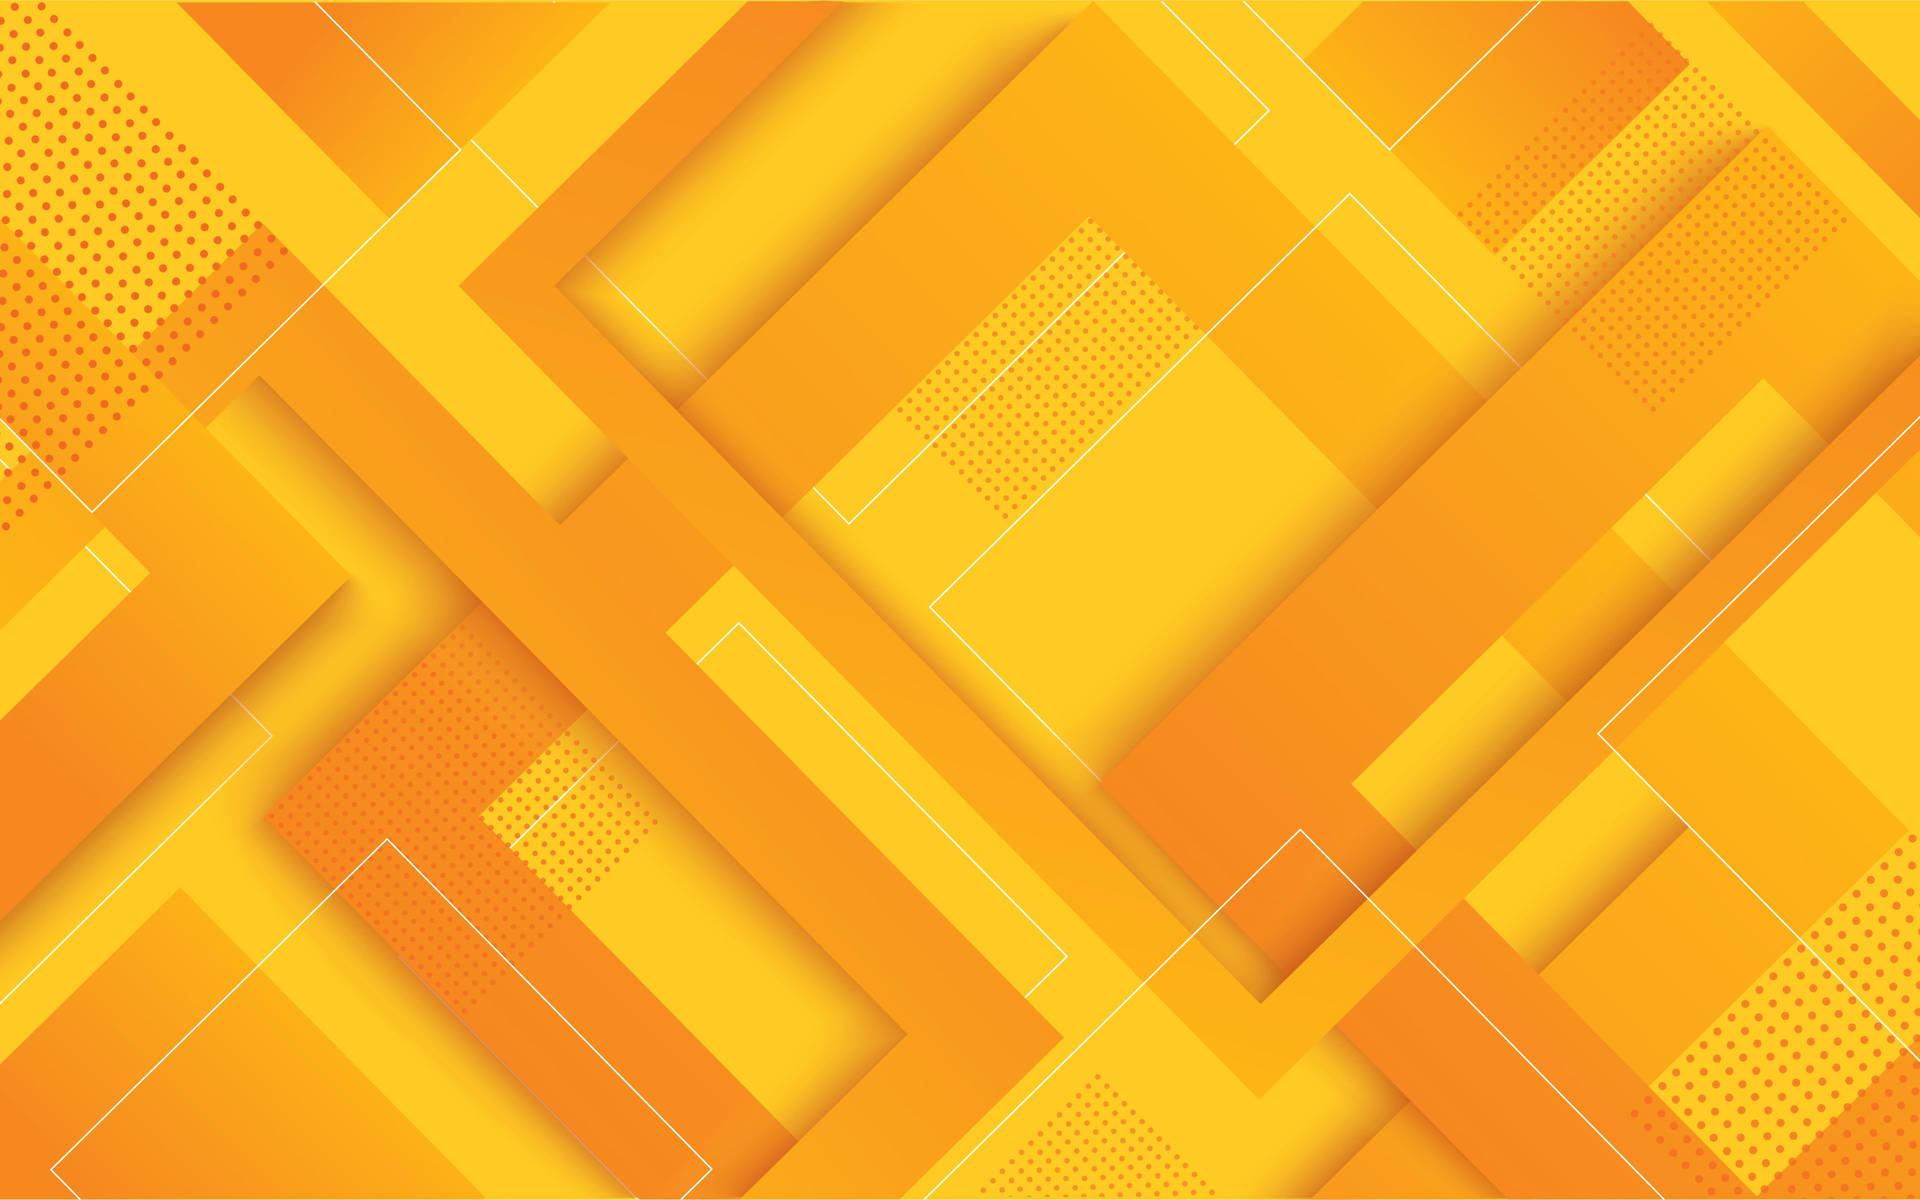 Orange And Yellow Abstract Material Design Wallpaper